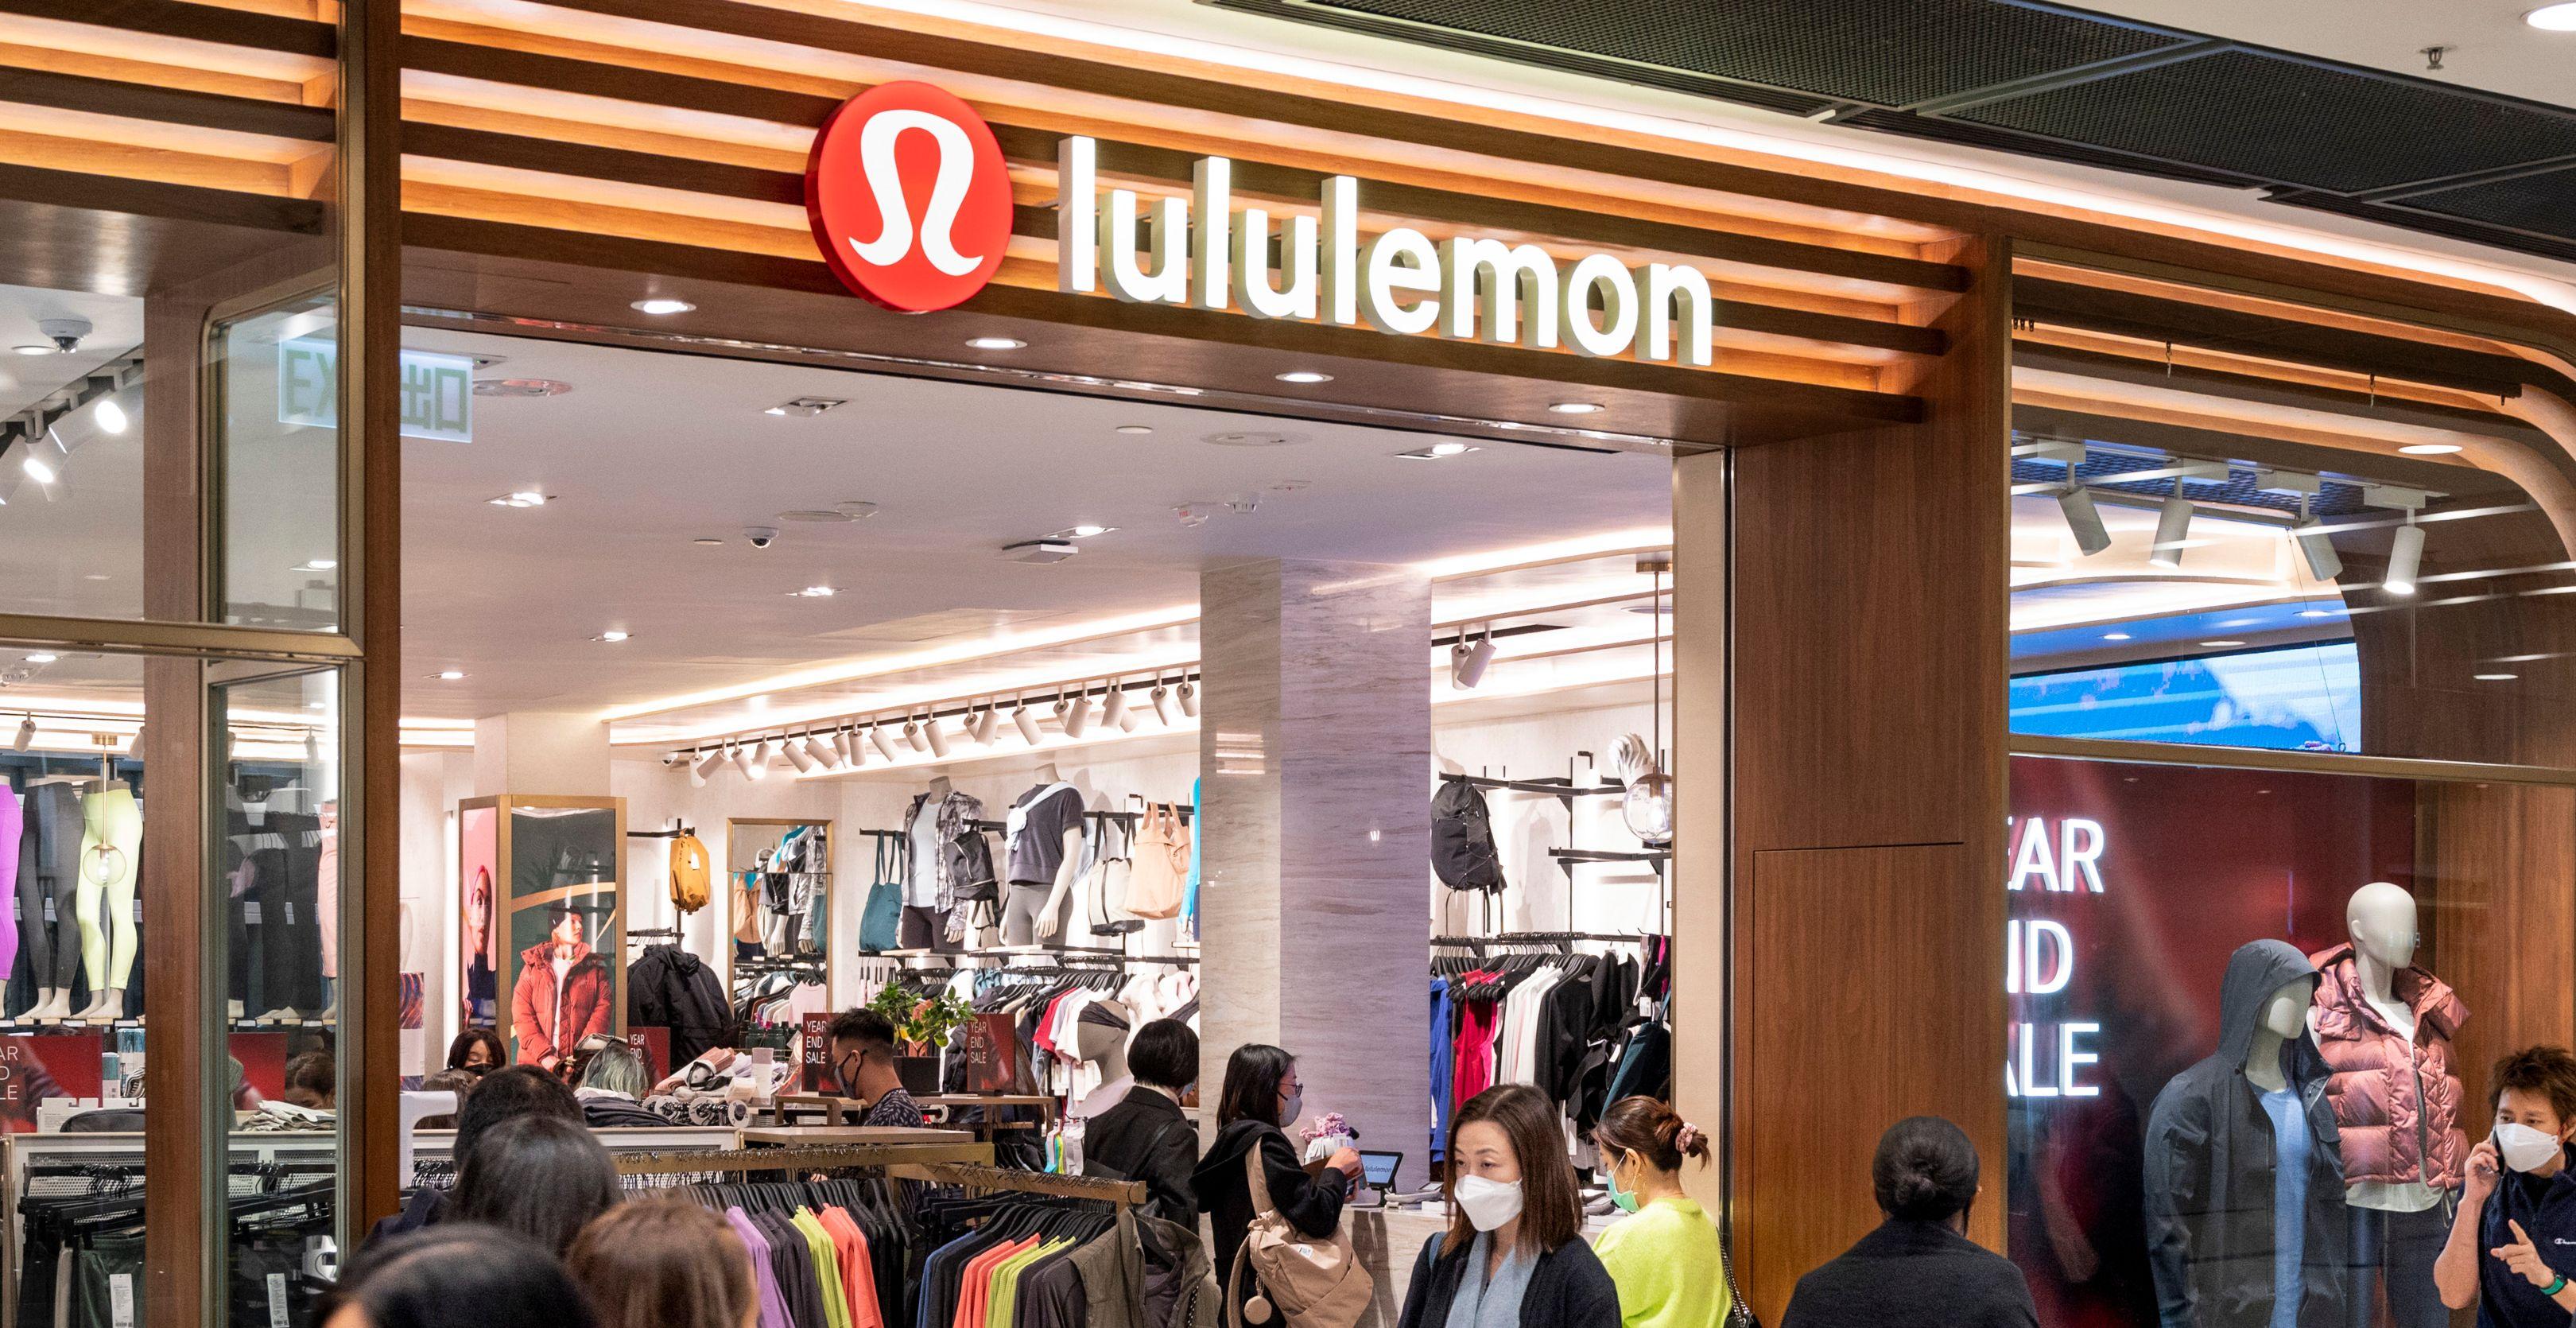  Shoppers walk past the Canadian sportswear clothing band, Lululemon store in Hong Kong.